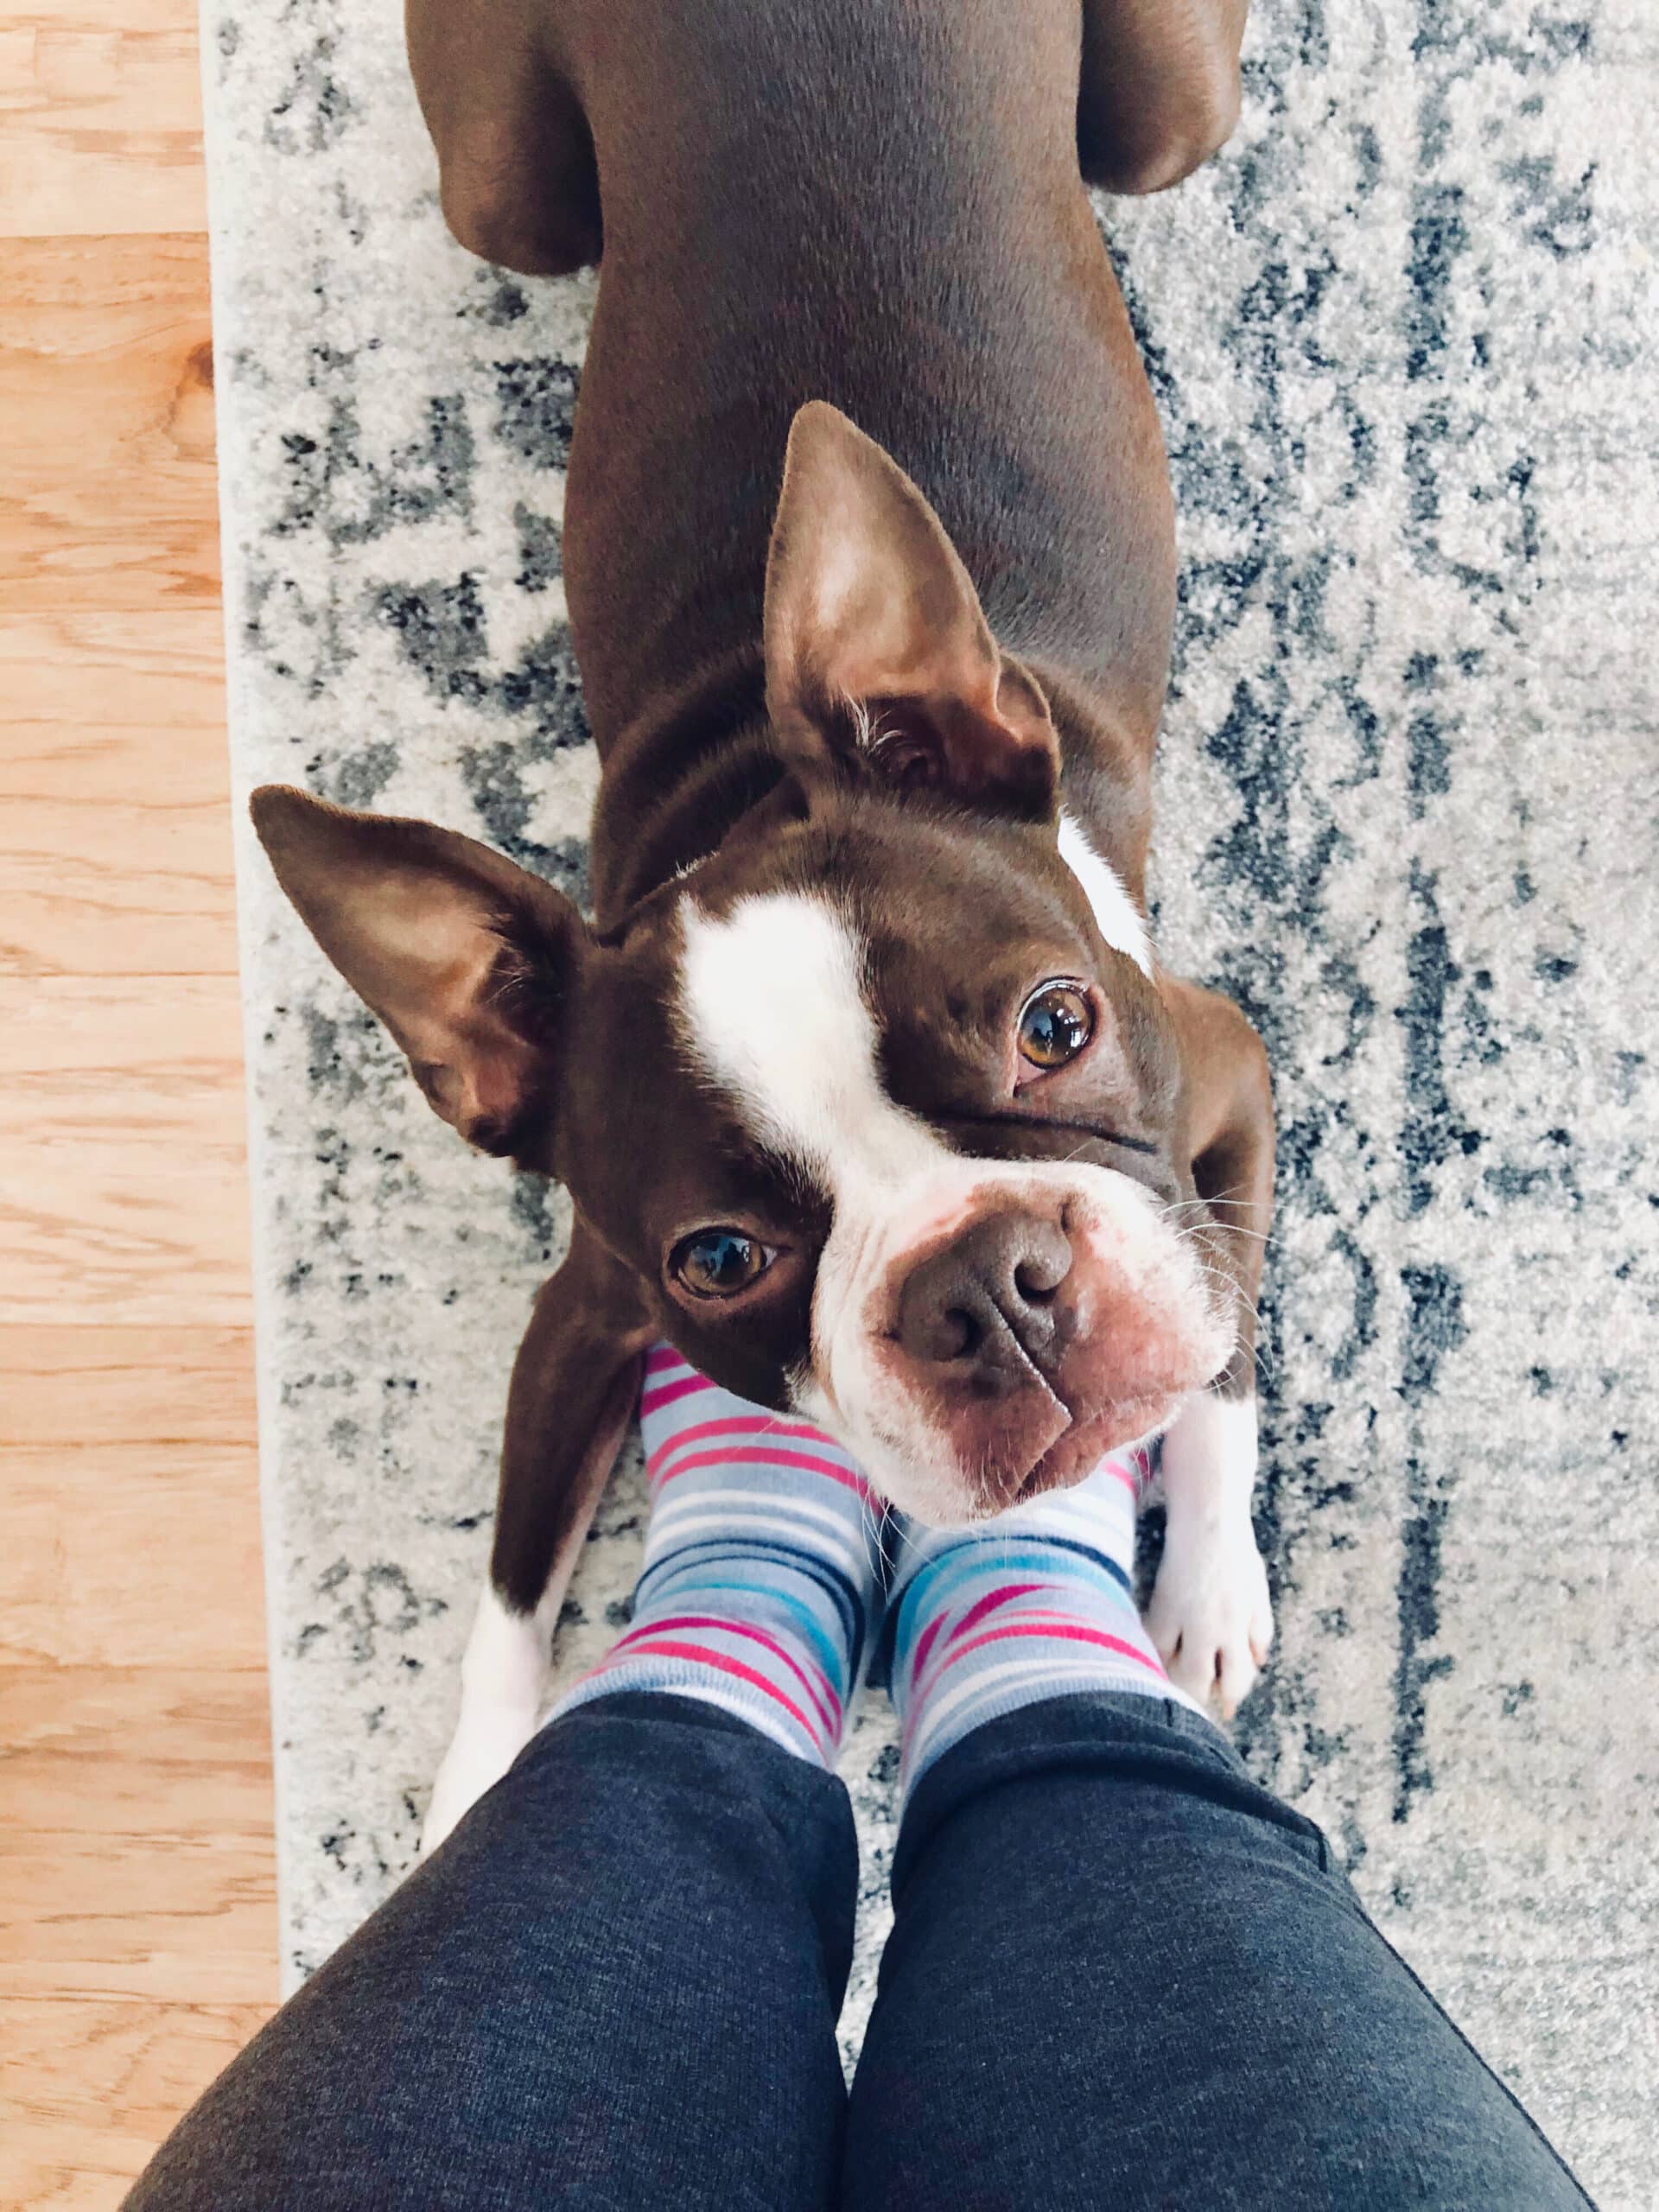 Boston Terrier dog looking up at woman wearing cozy socks